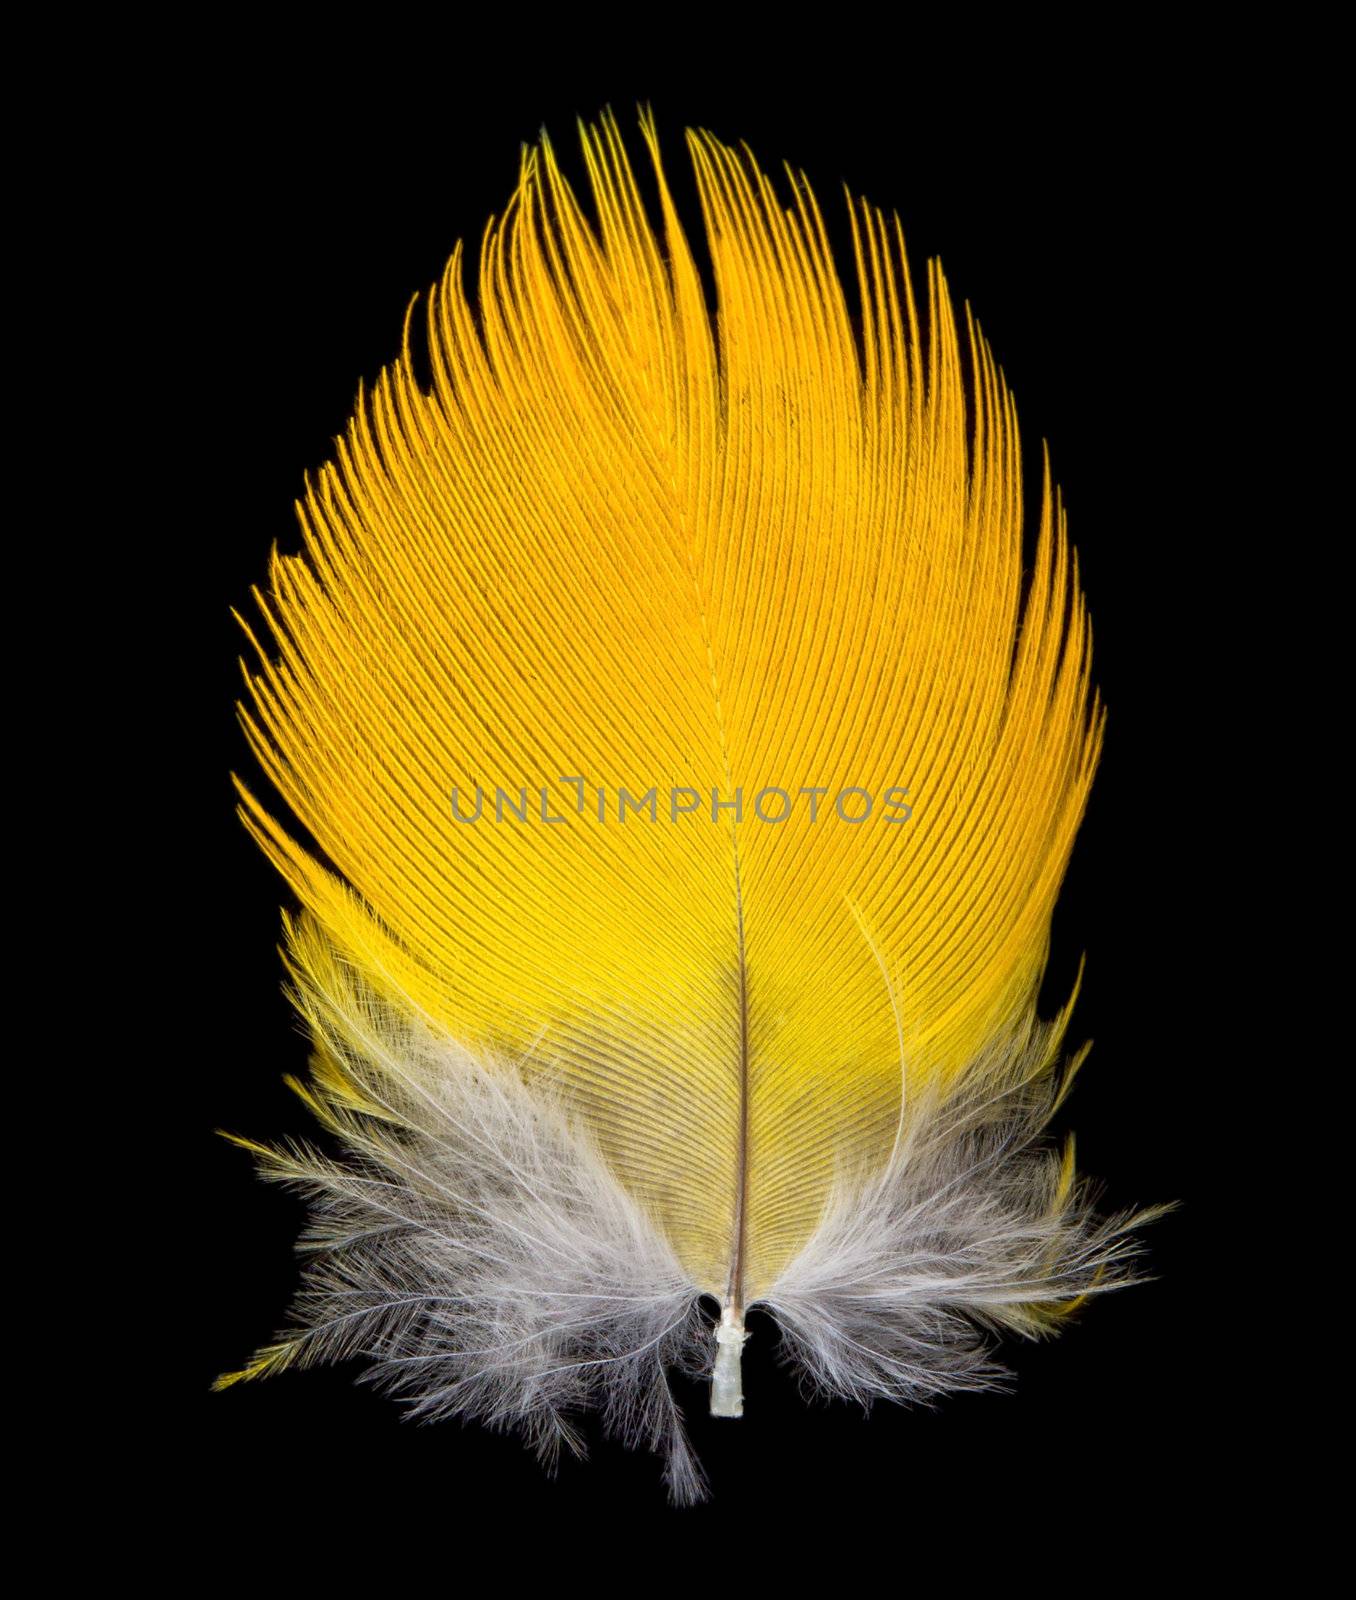 close-up feather, isolated on black